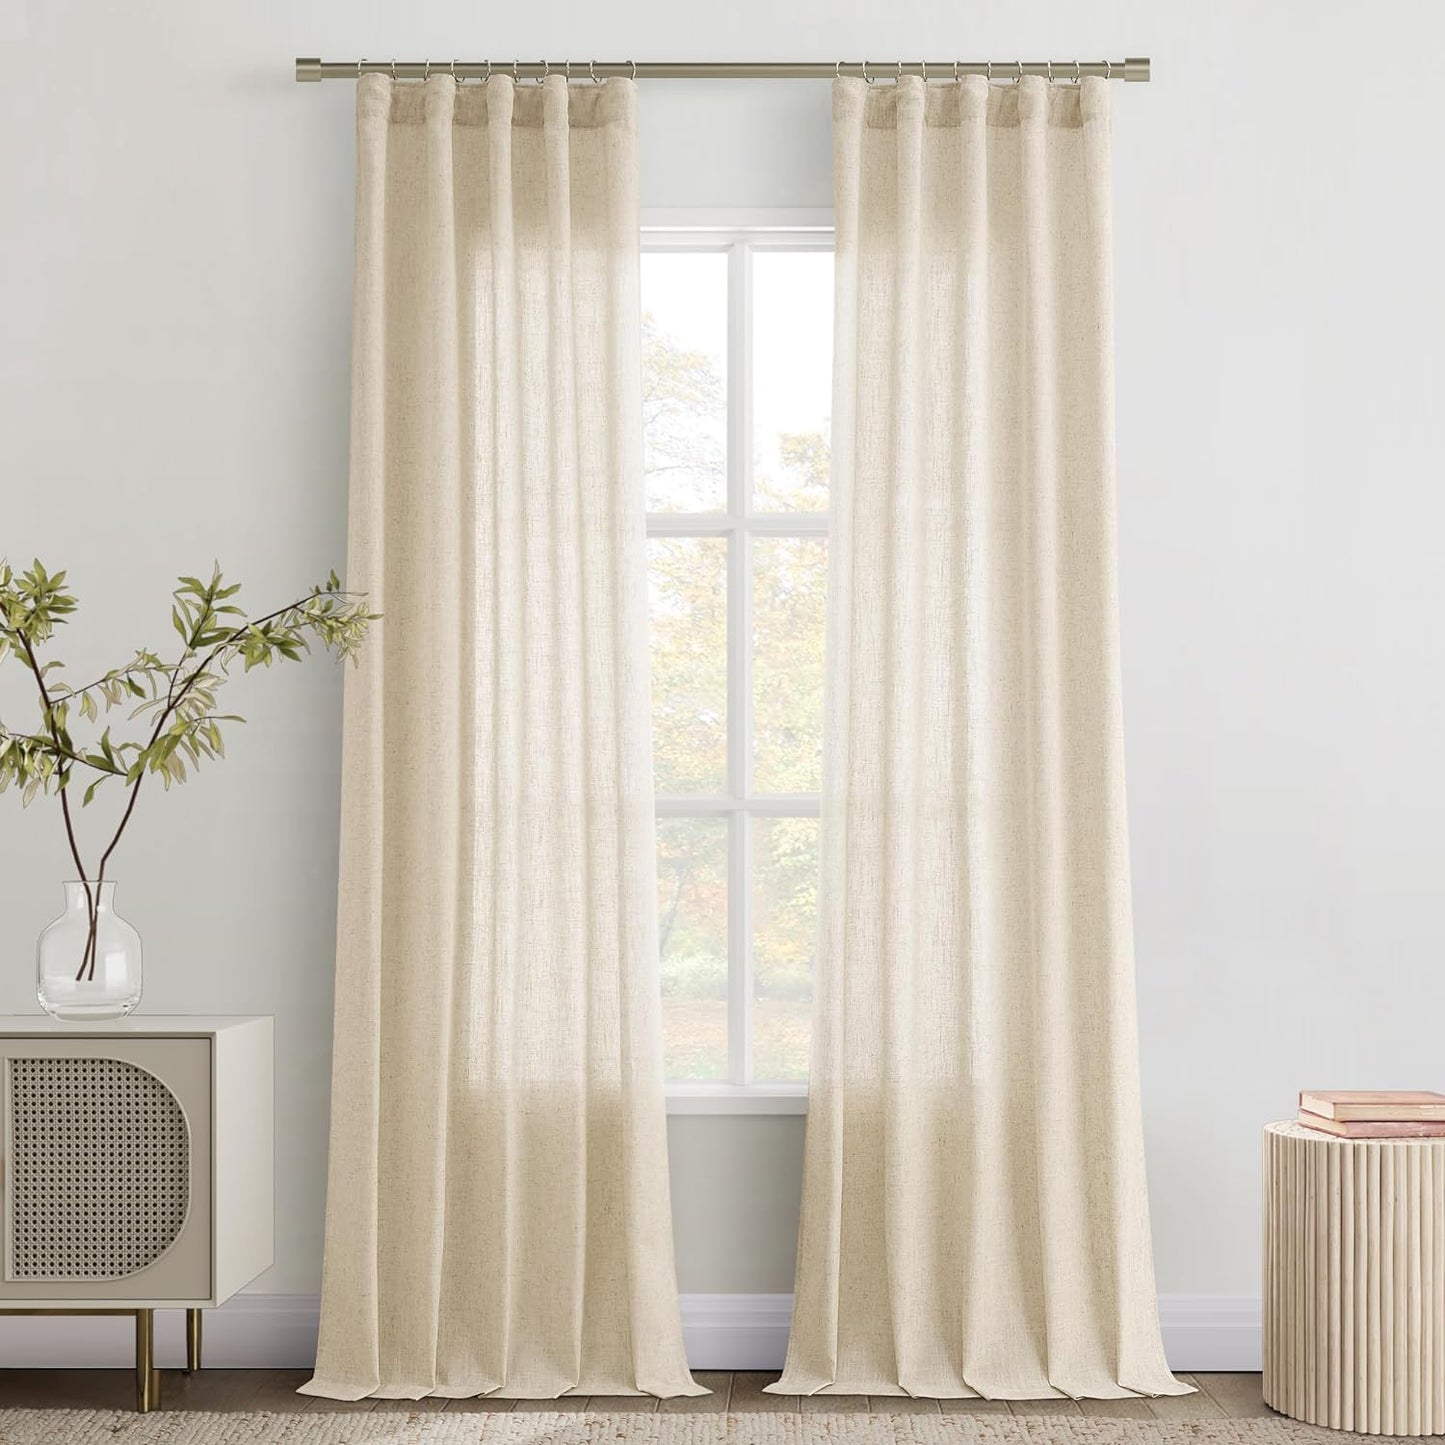 Joywell Natural Linen Cream Curtains 84 Inches Long for Living Room Bedroom Hook Belt Back Tab Pinch Pleated Light Filtering Ivory White Neutral Boho Modern Farmhouse Linen Drapes 84 Length 2 Panels  Joywell Sand Beige 38W X 84L Inch X 2 Panels 